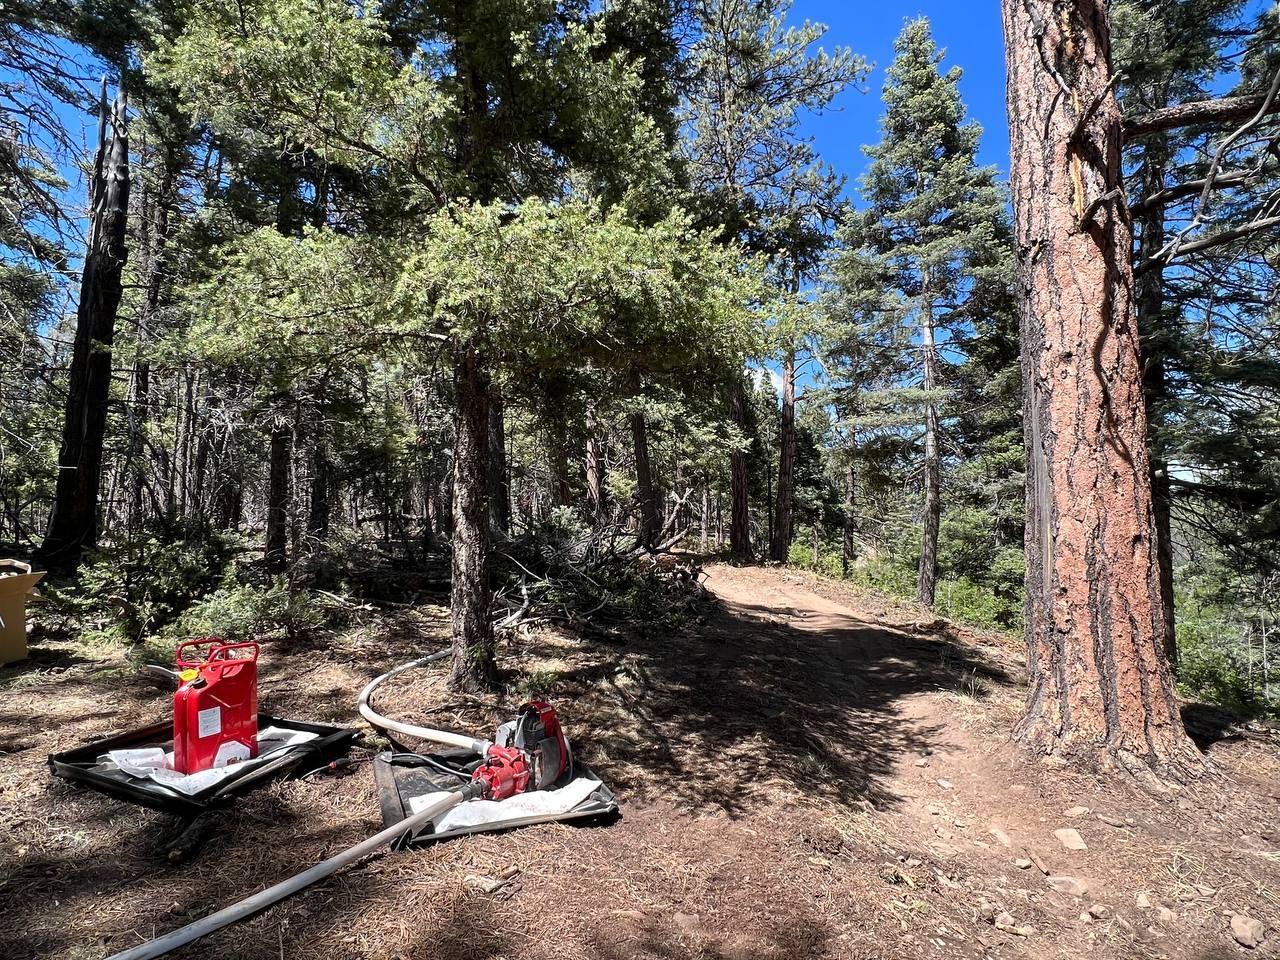 Red gas can, red and black pump hooked to white hose running along handline through a forested area.